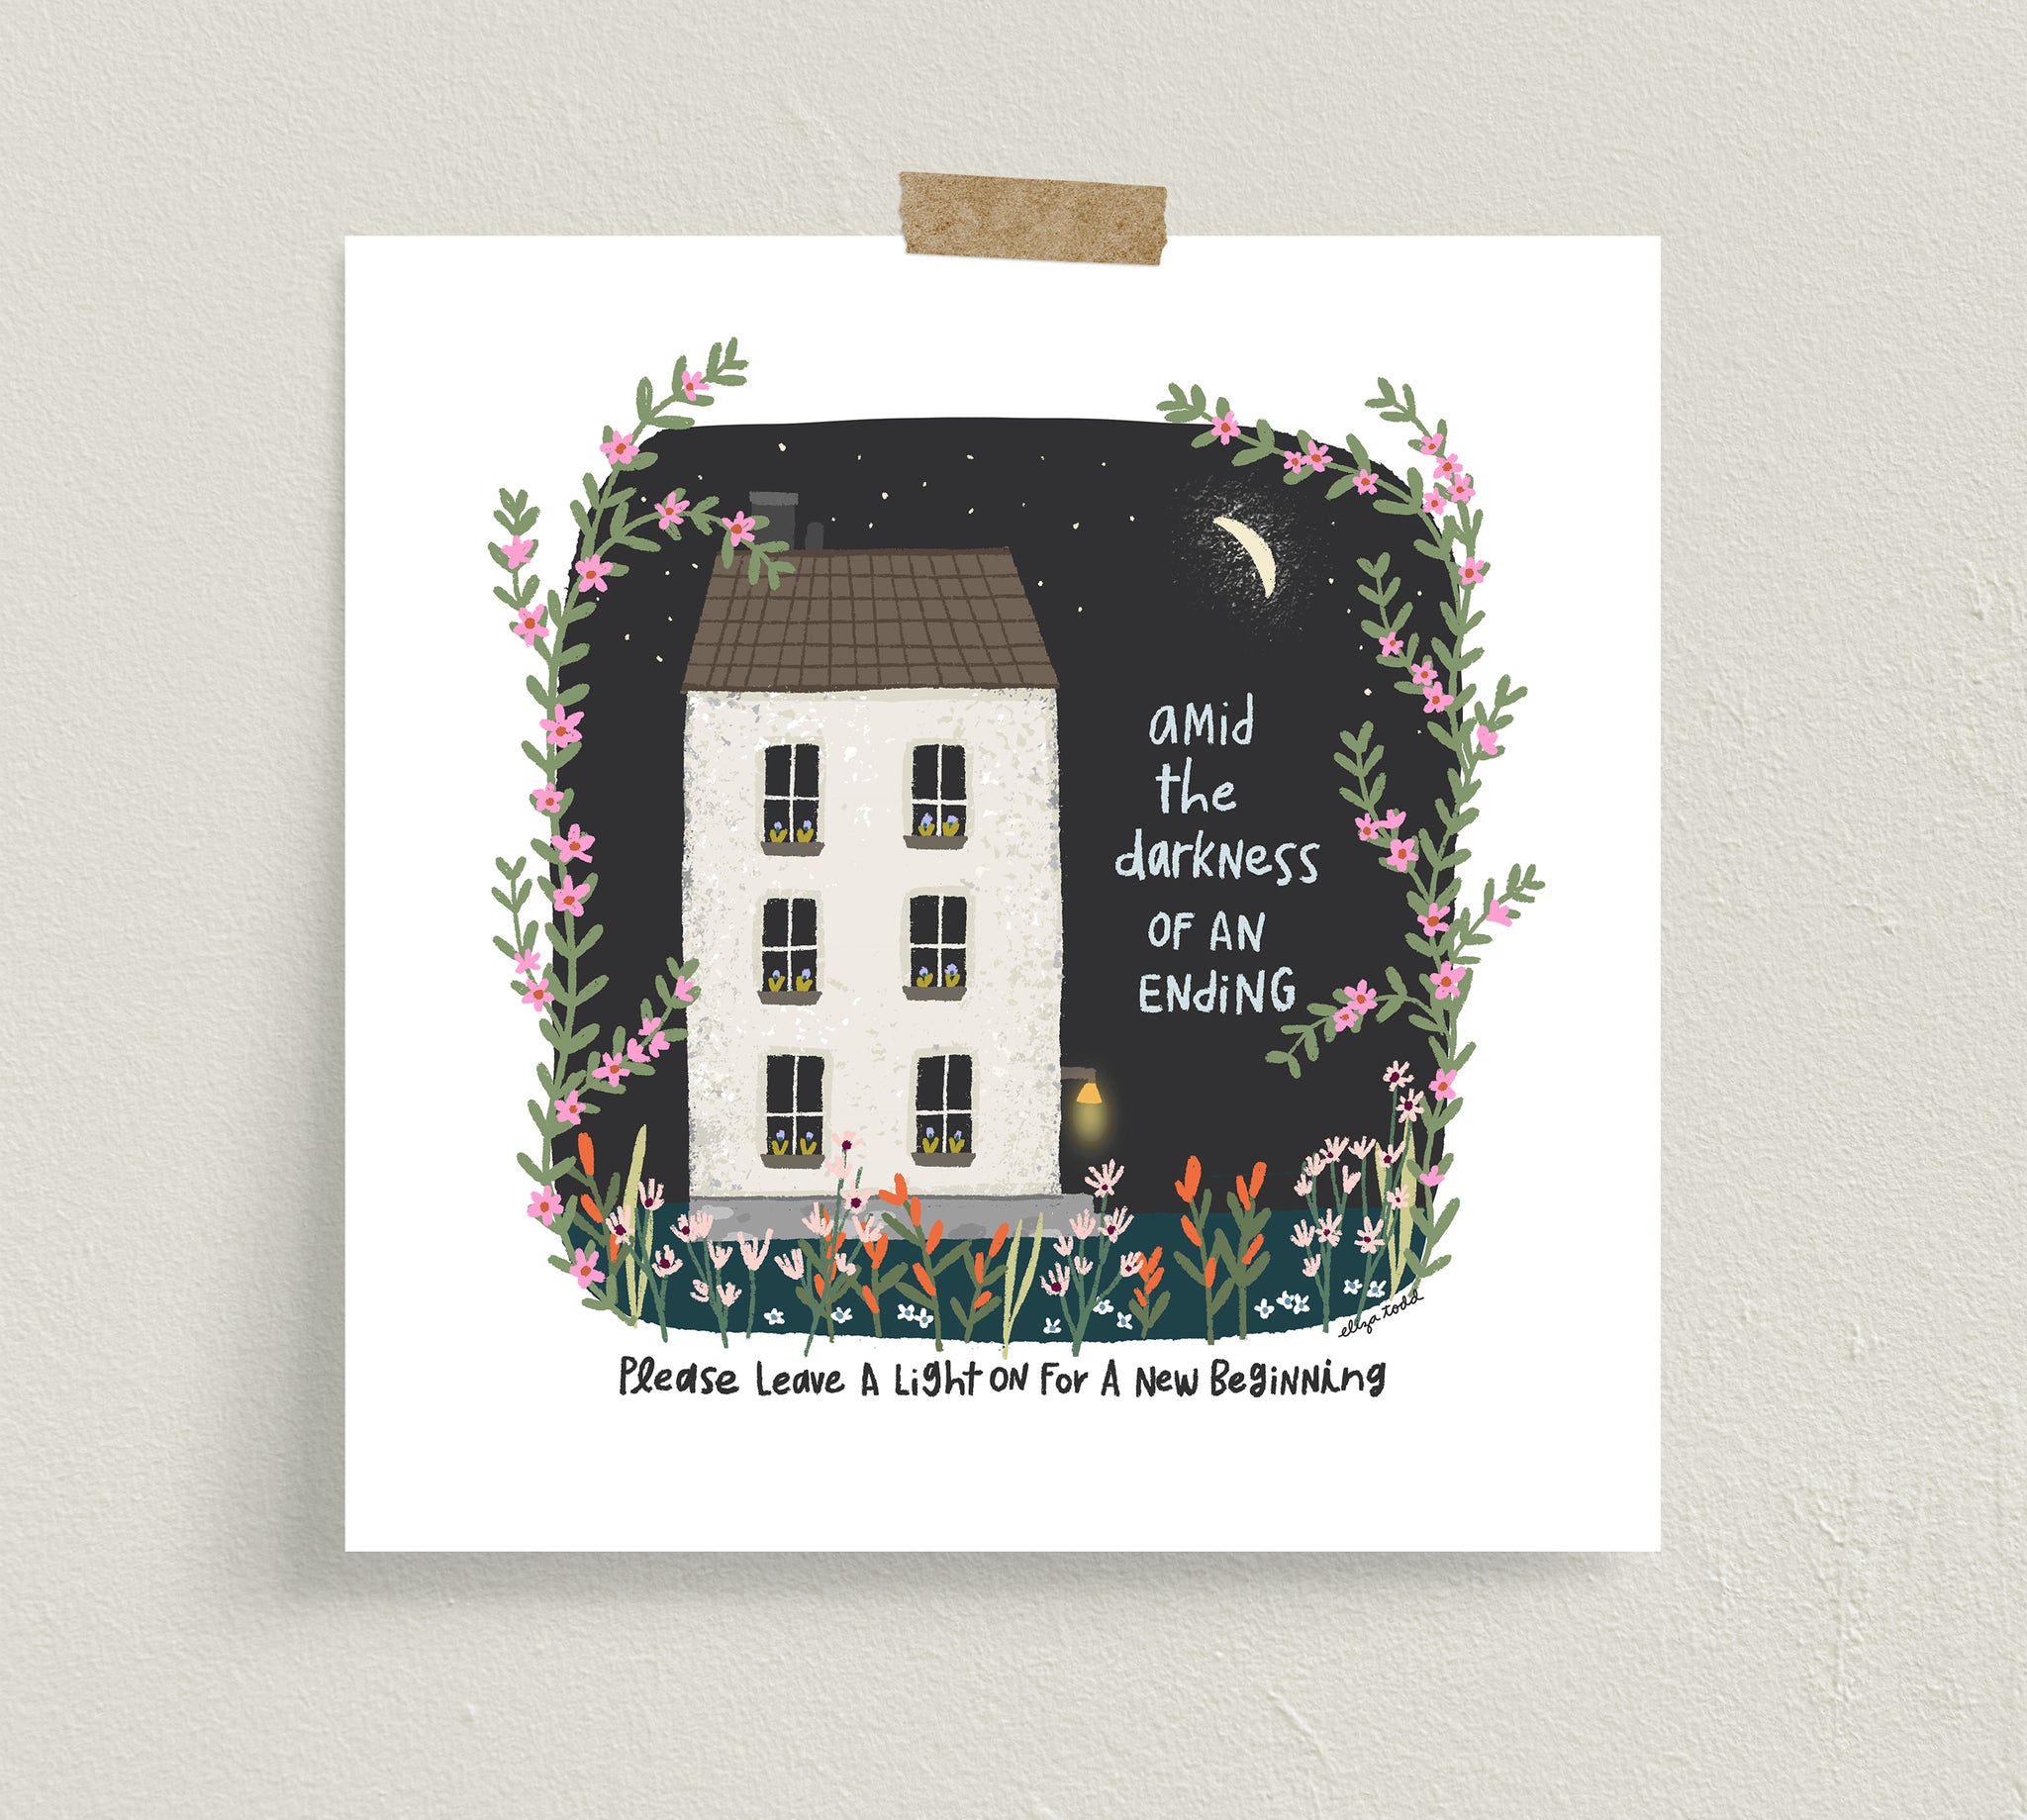 Fine art prints by Eliza Todd featuring a white house at night with the front porch light on saying "Amid the darkness of an ending, please leave a light on for a new beginning." - APeaceofWerk.com